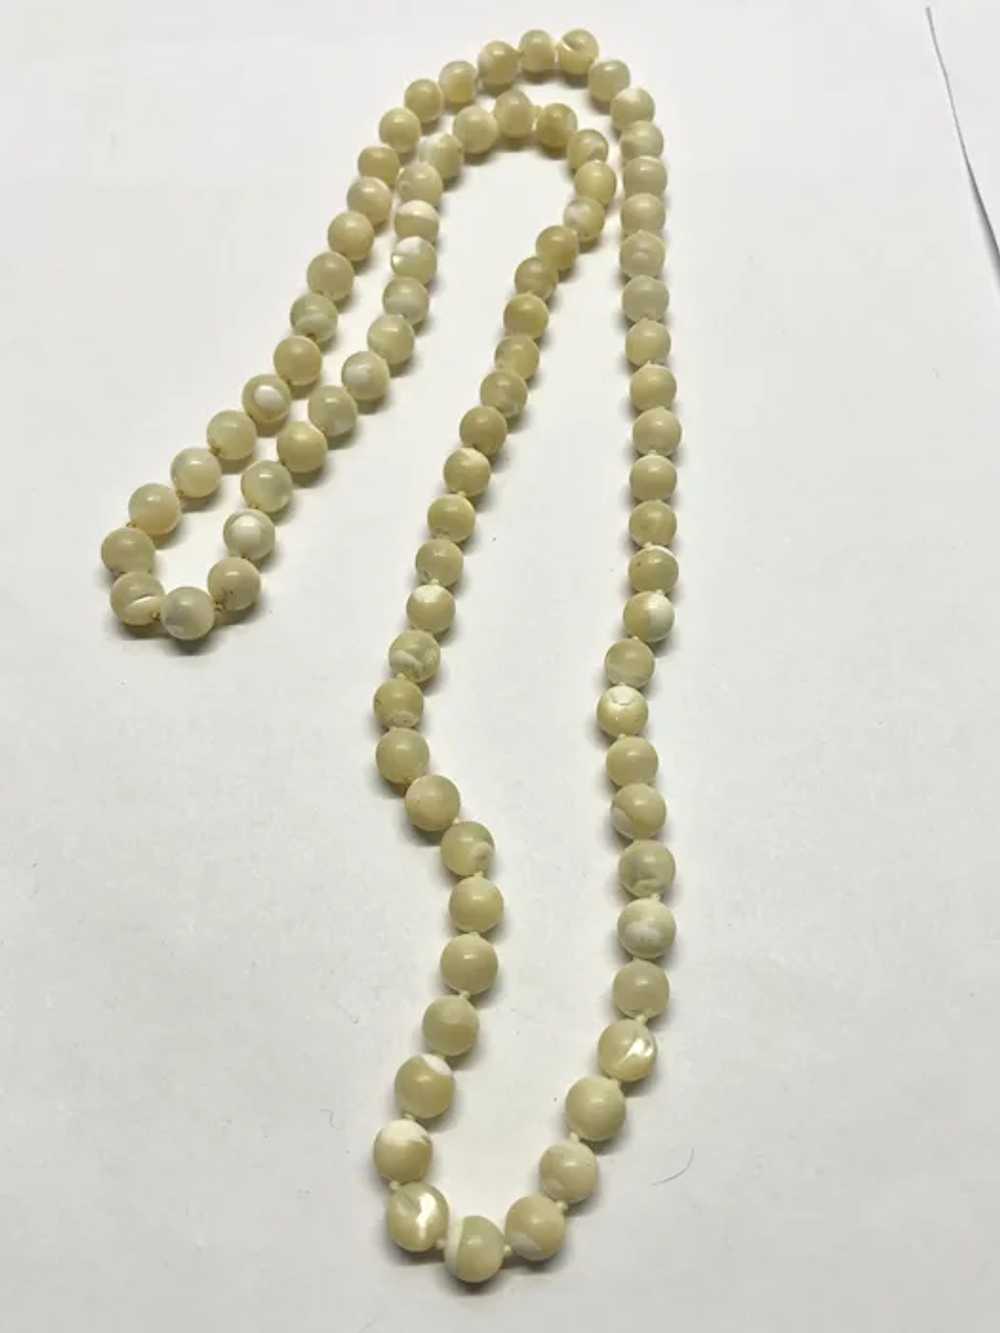 Vintage glass mother of pearl beaded necklace - image 3